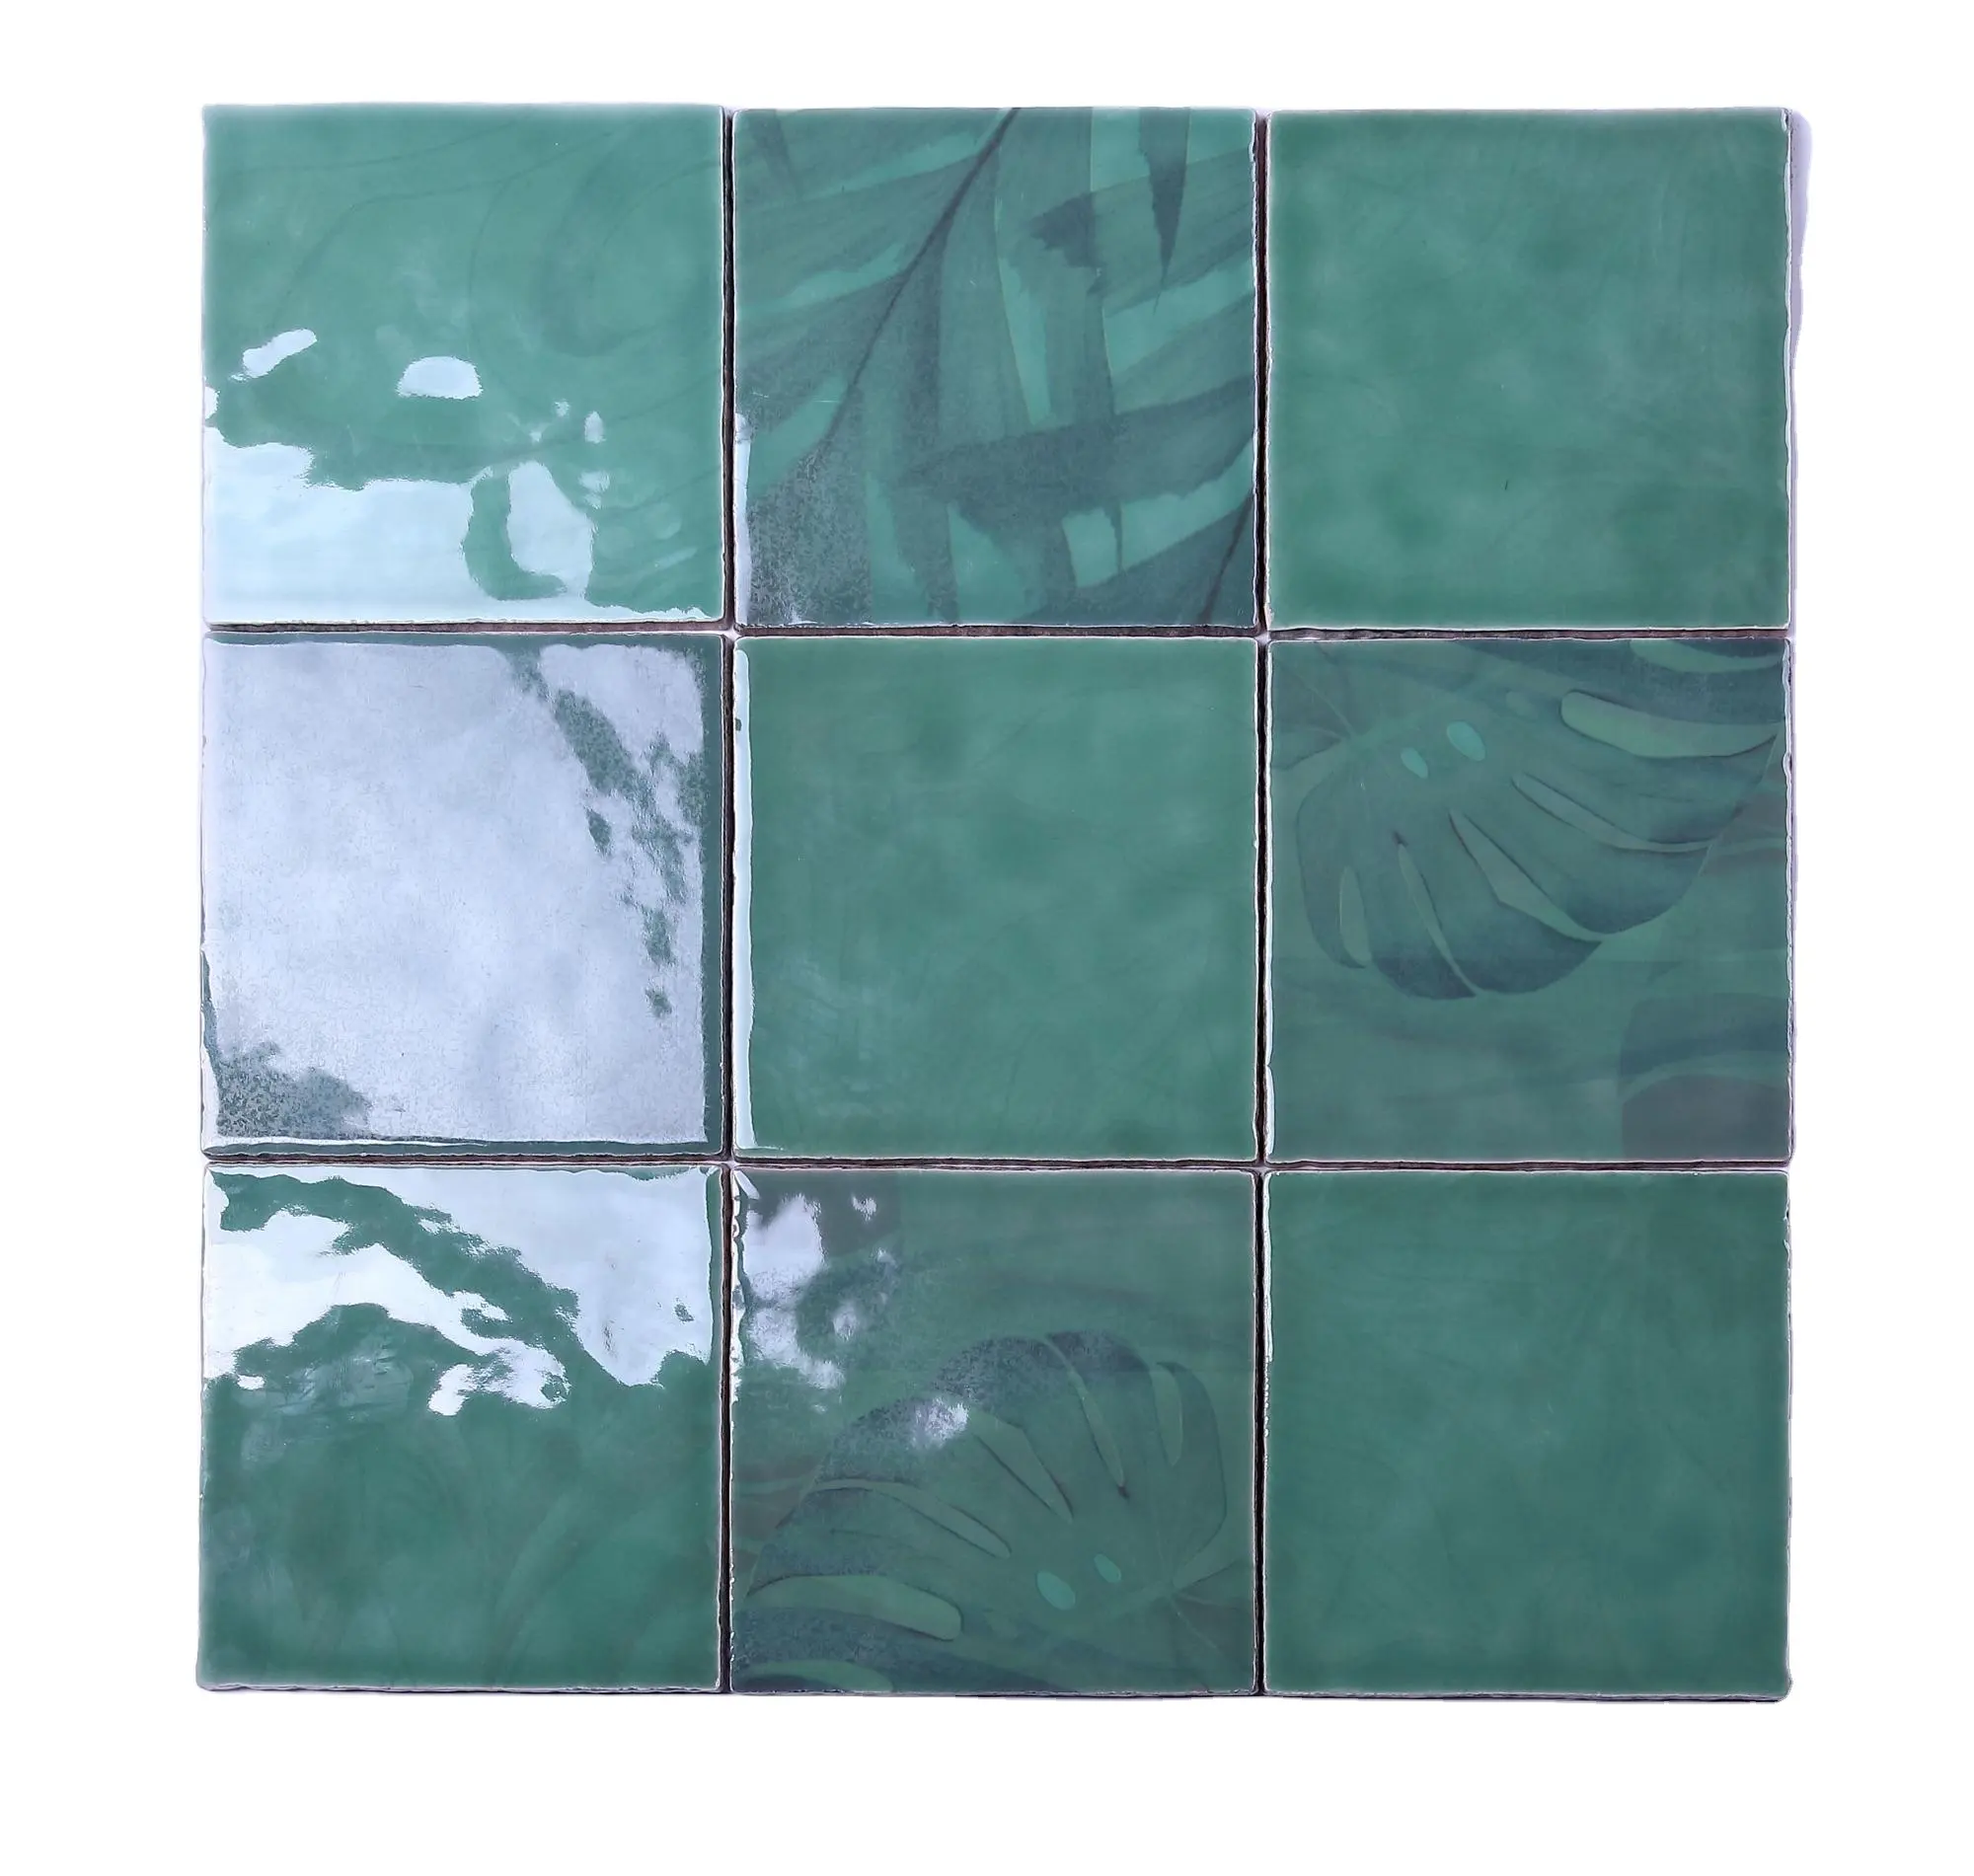 Chinese style ink painting Warm tone bathroom tiles kitchen tiles ceramic tiles